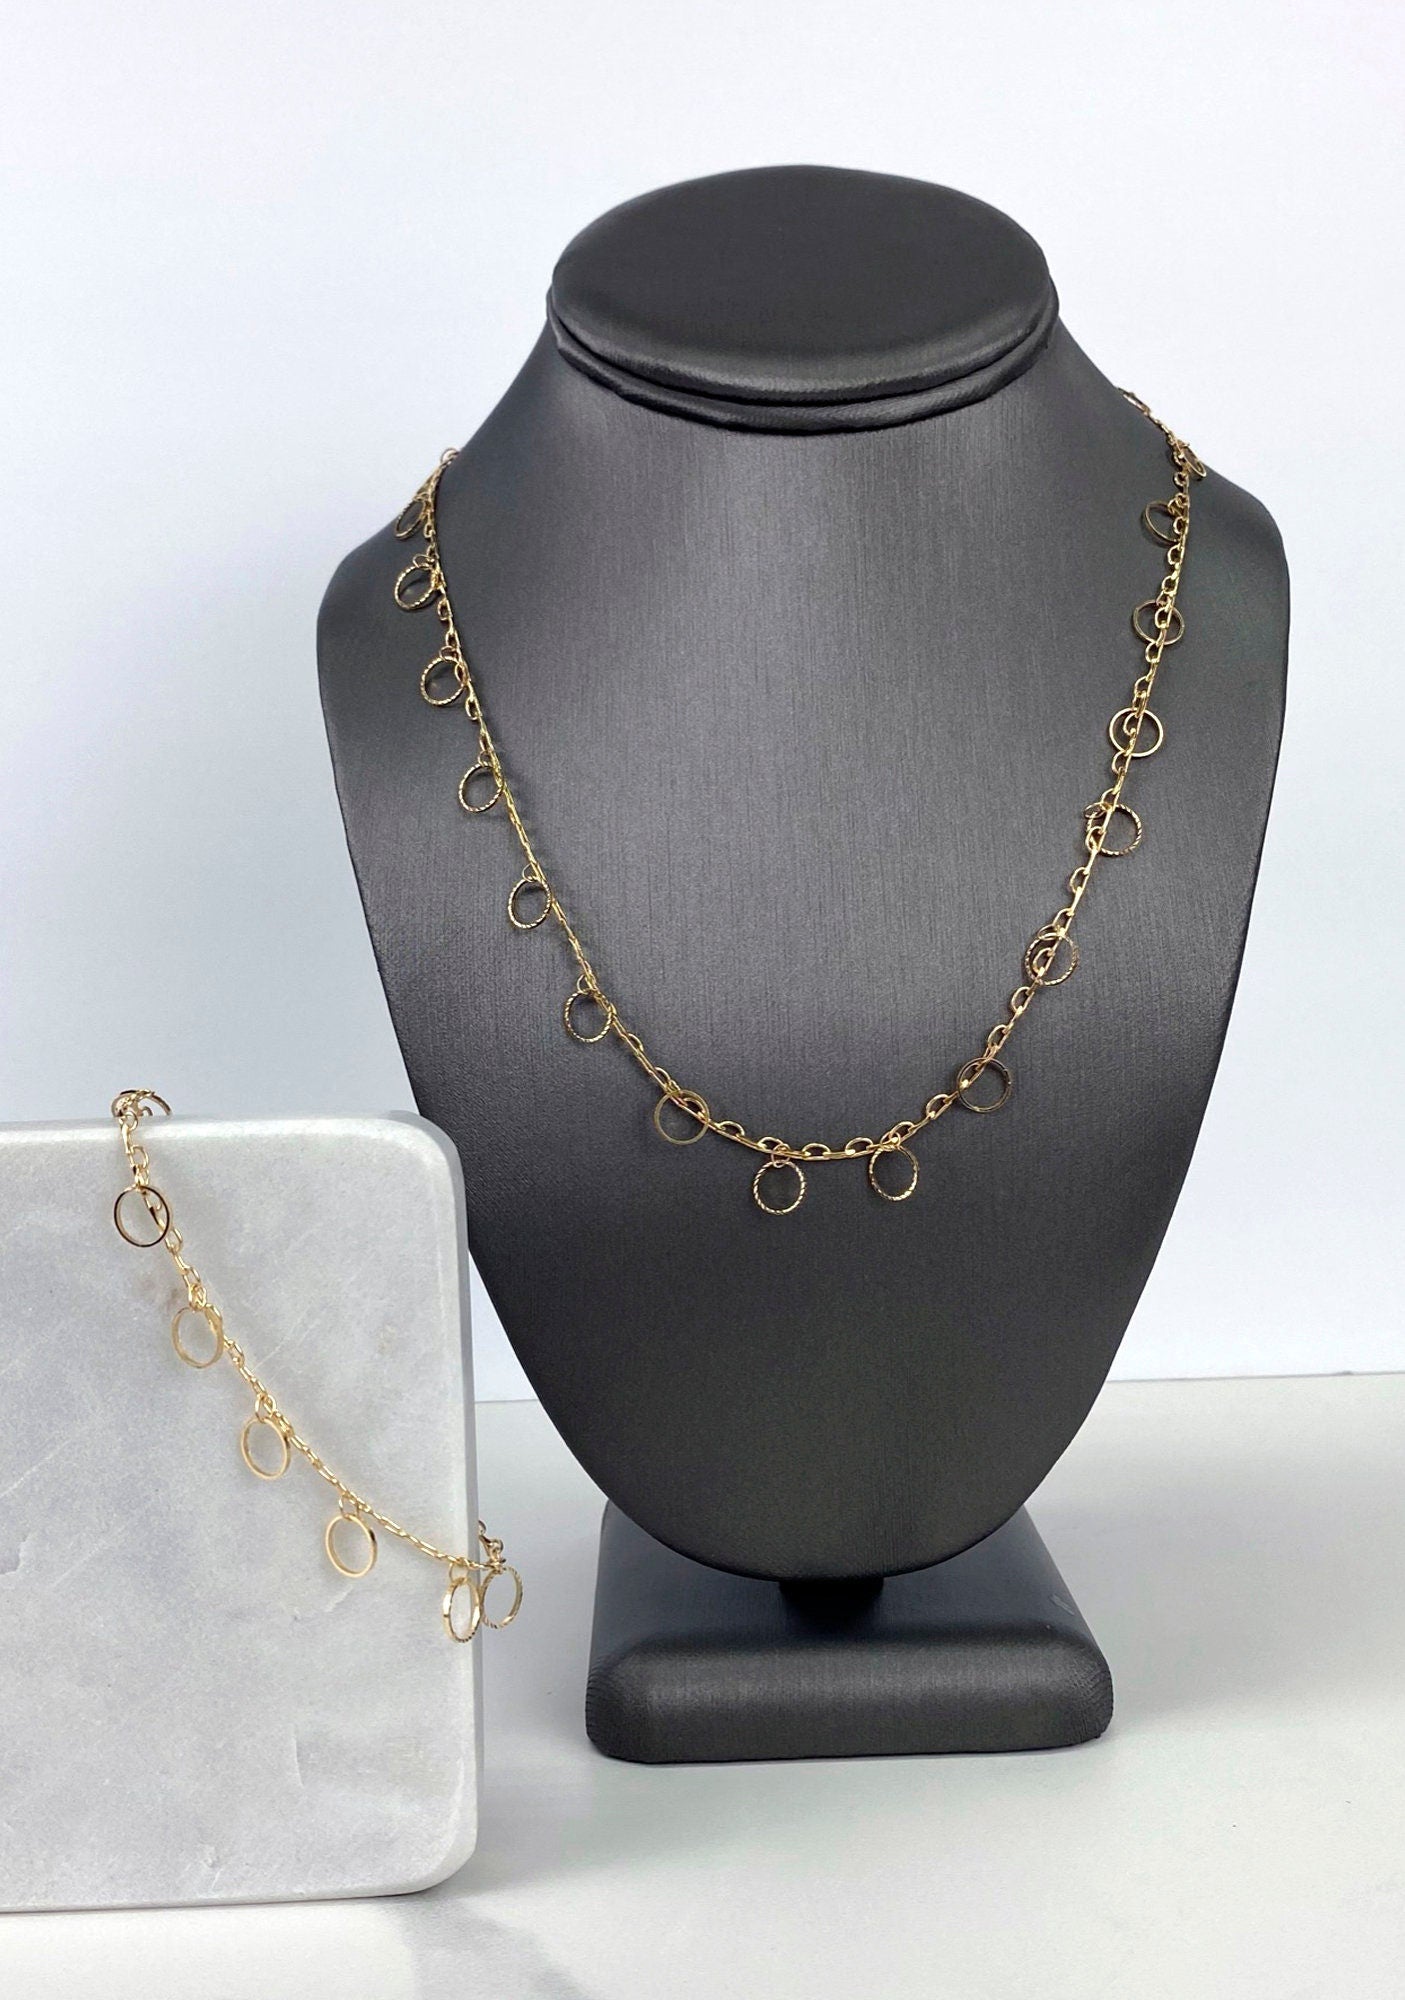 18k Gold Filled Fancy Delicate Circles Set Necklace 24 inches Long & Bracelet 8 inches Wholesale Jewelry Supplies